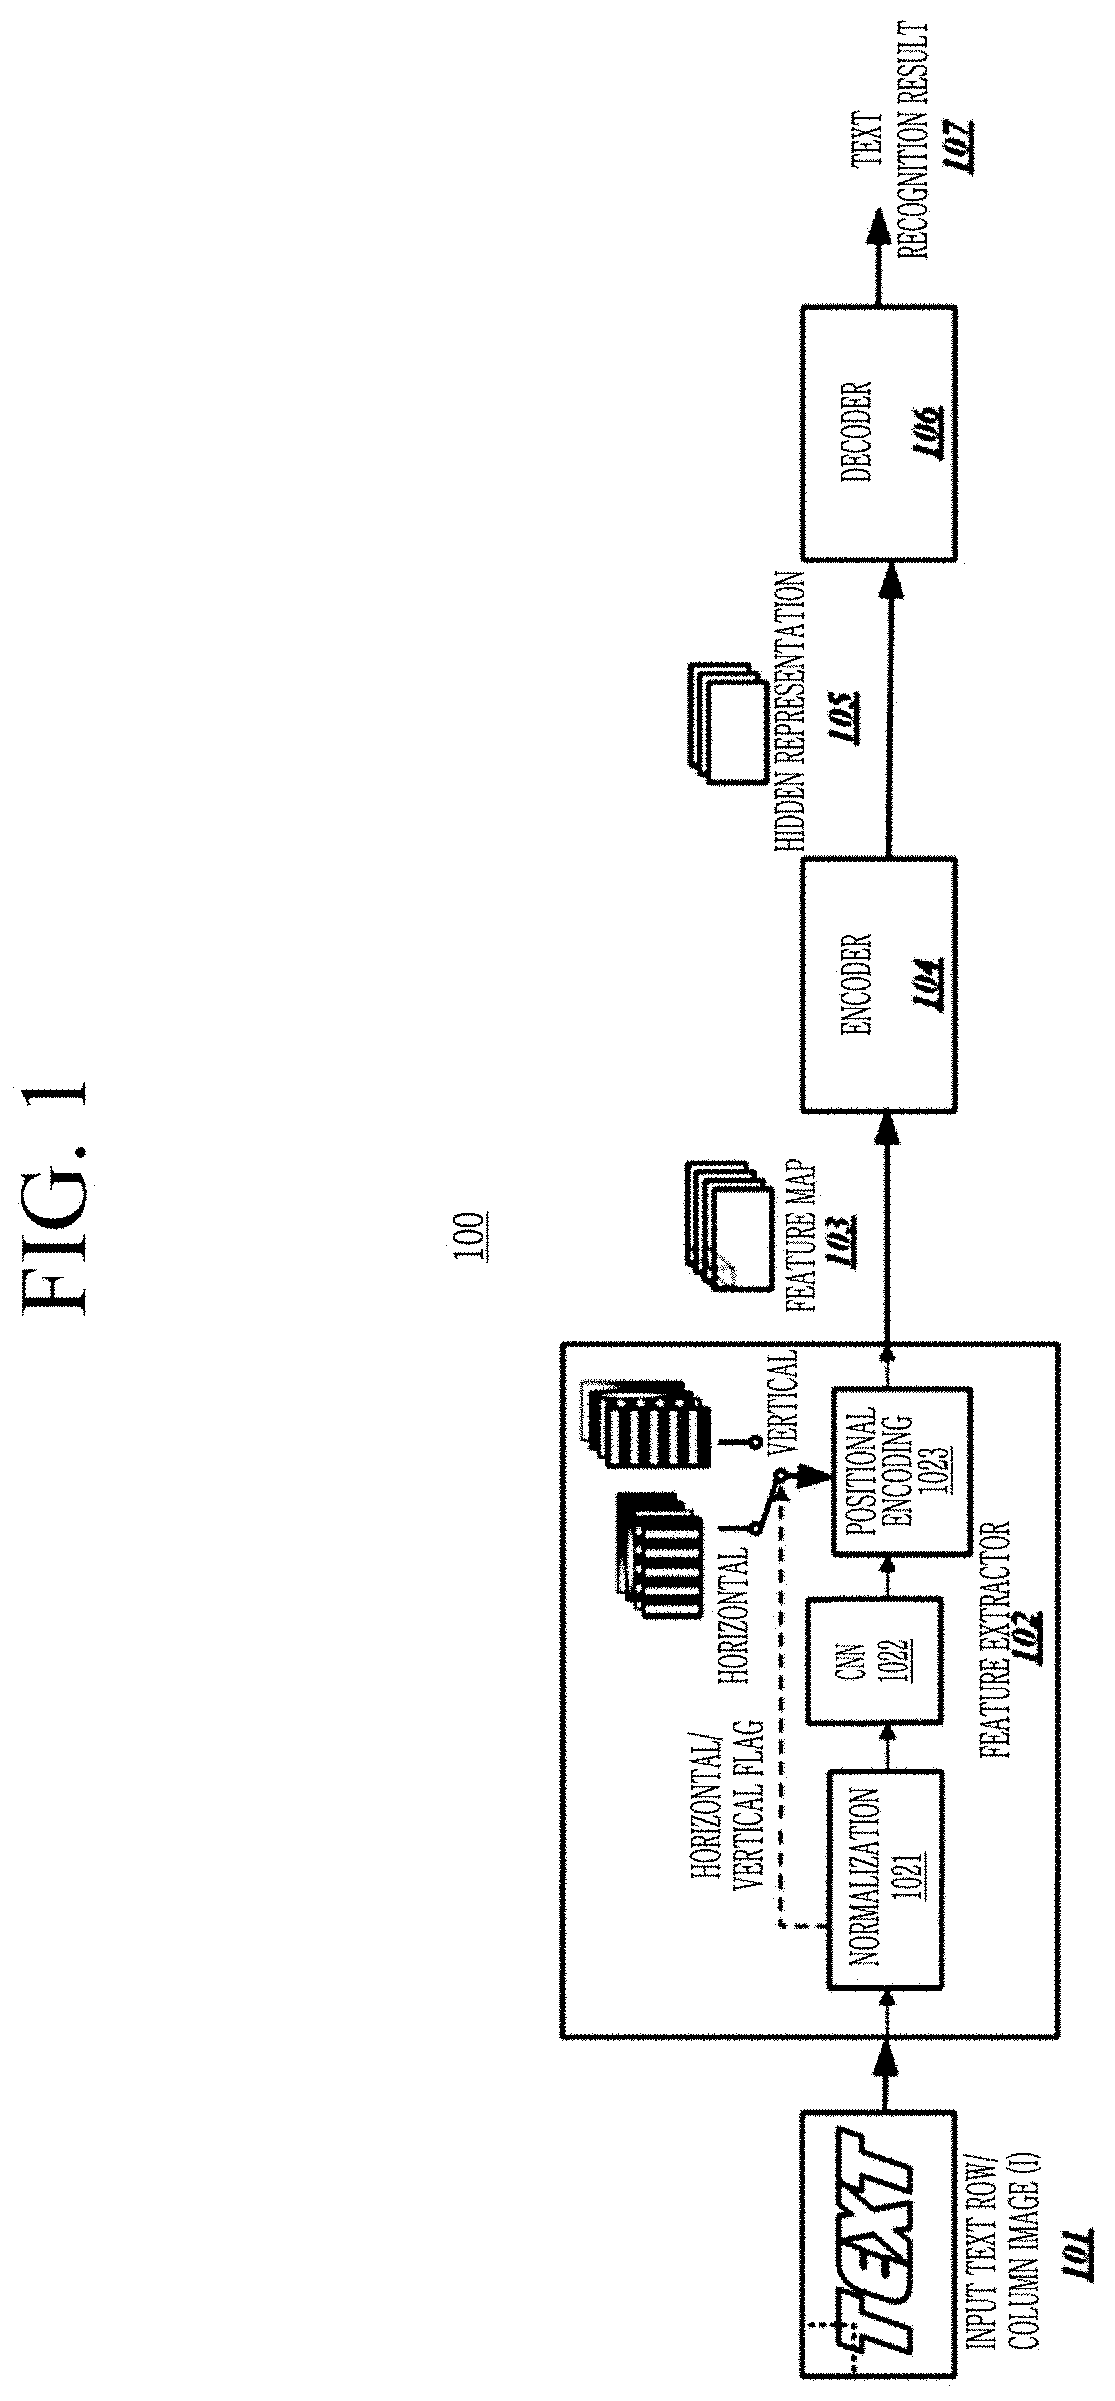 Multi-directional scene text recognition method and system based on multi-element attention mechanism